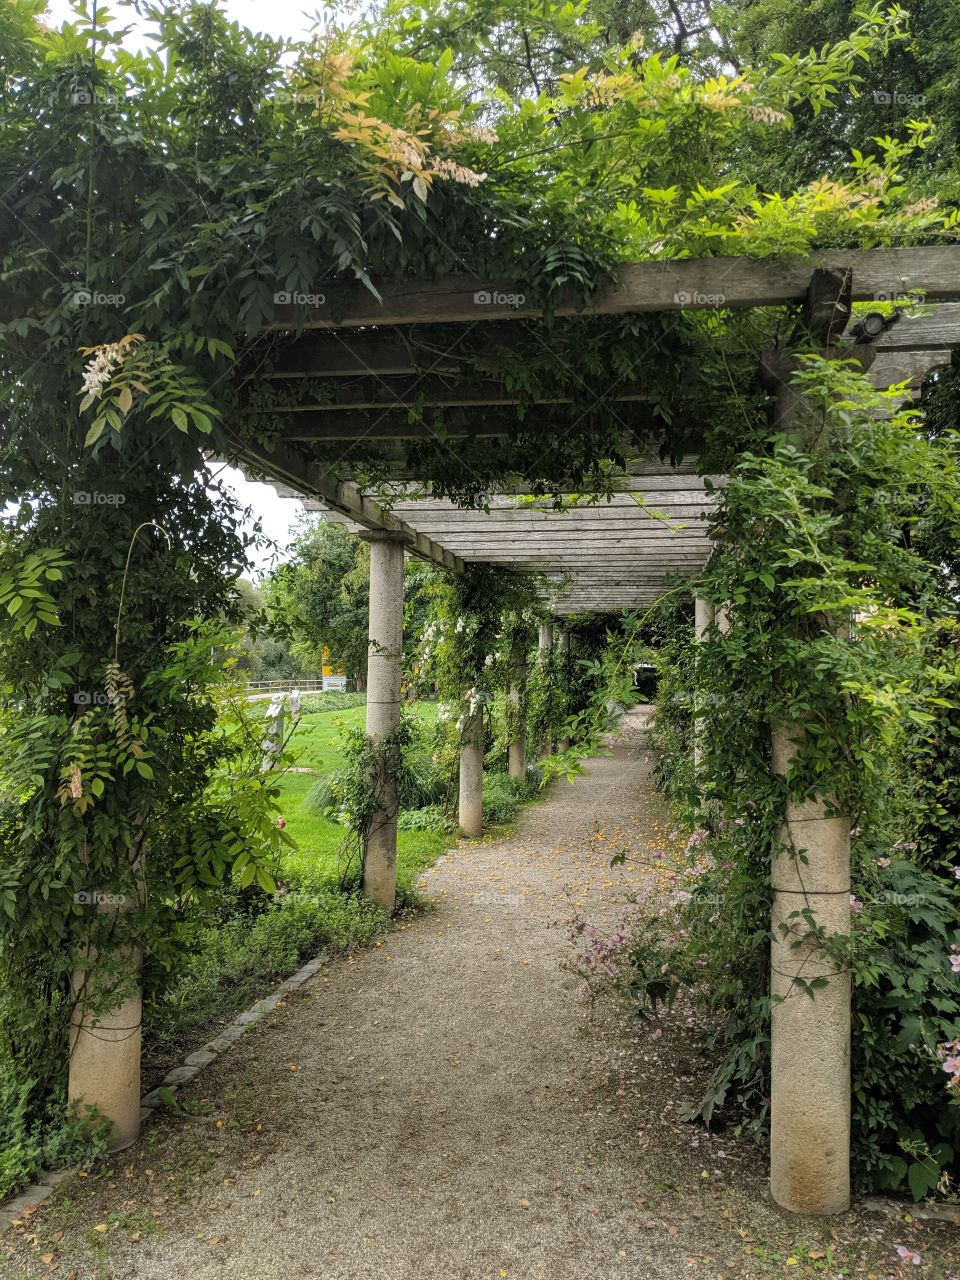 Europe European public garden arch walkway path overgrown with roses and flowering plants